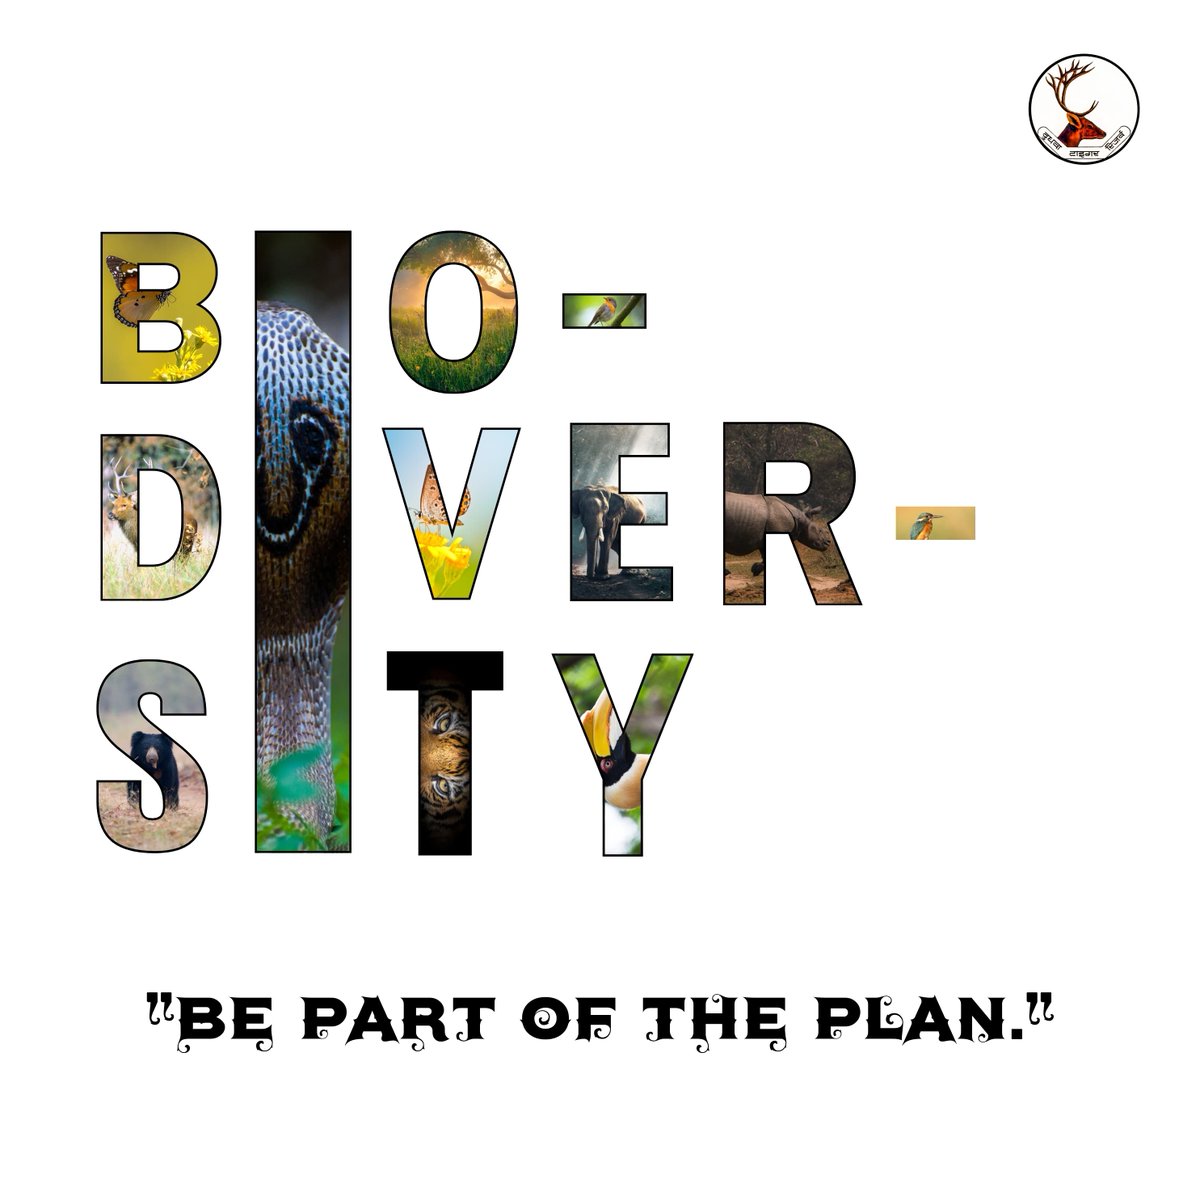 The value of biodiversity is that it makes our ecosystems more resilient, which is a prerequisite for stable societies; 'Be Part of the Plan.' #BiodiversityPlan #biodiversity @moefcc @ntca_india @UpforestUp @ifs_lalit @raju2179 @Shiva3894 @IUCN